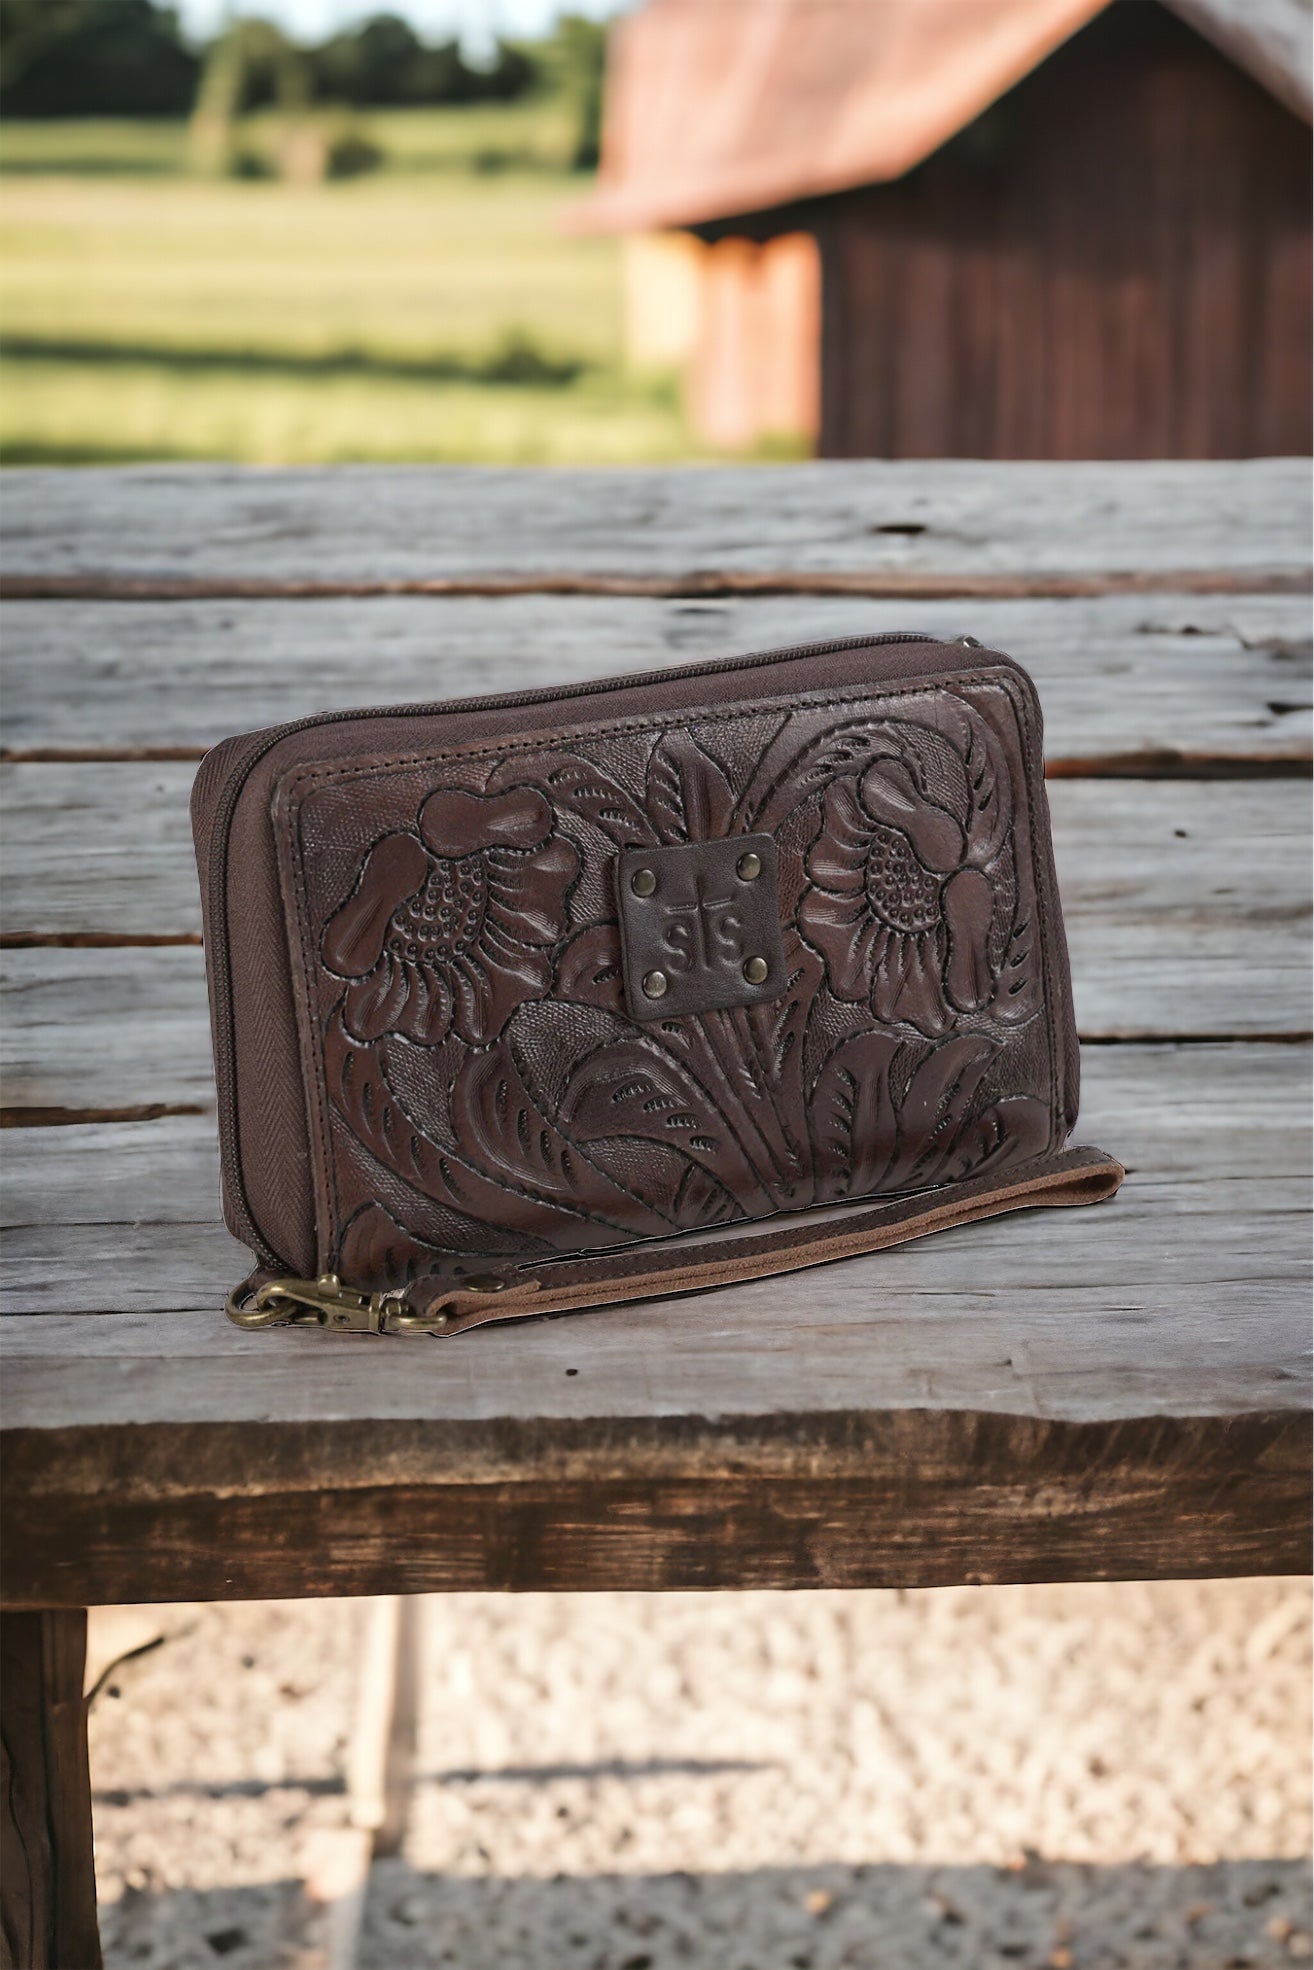 Tilly’s Tooled Leather Organizer Wallet by STS Ranchwear